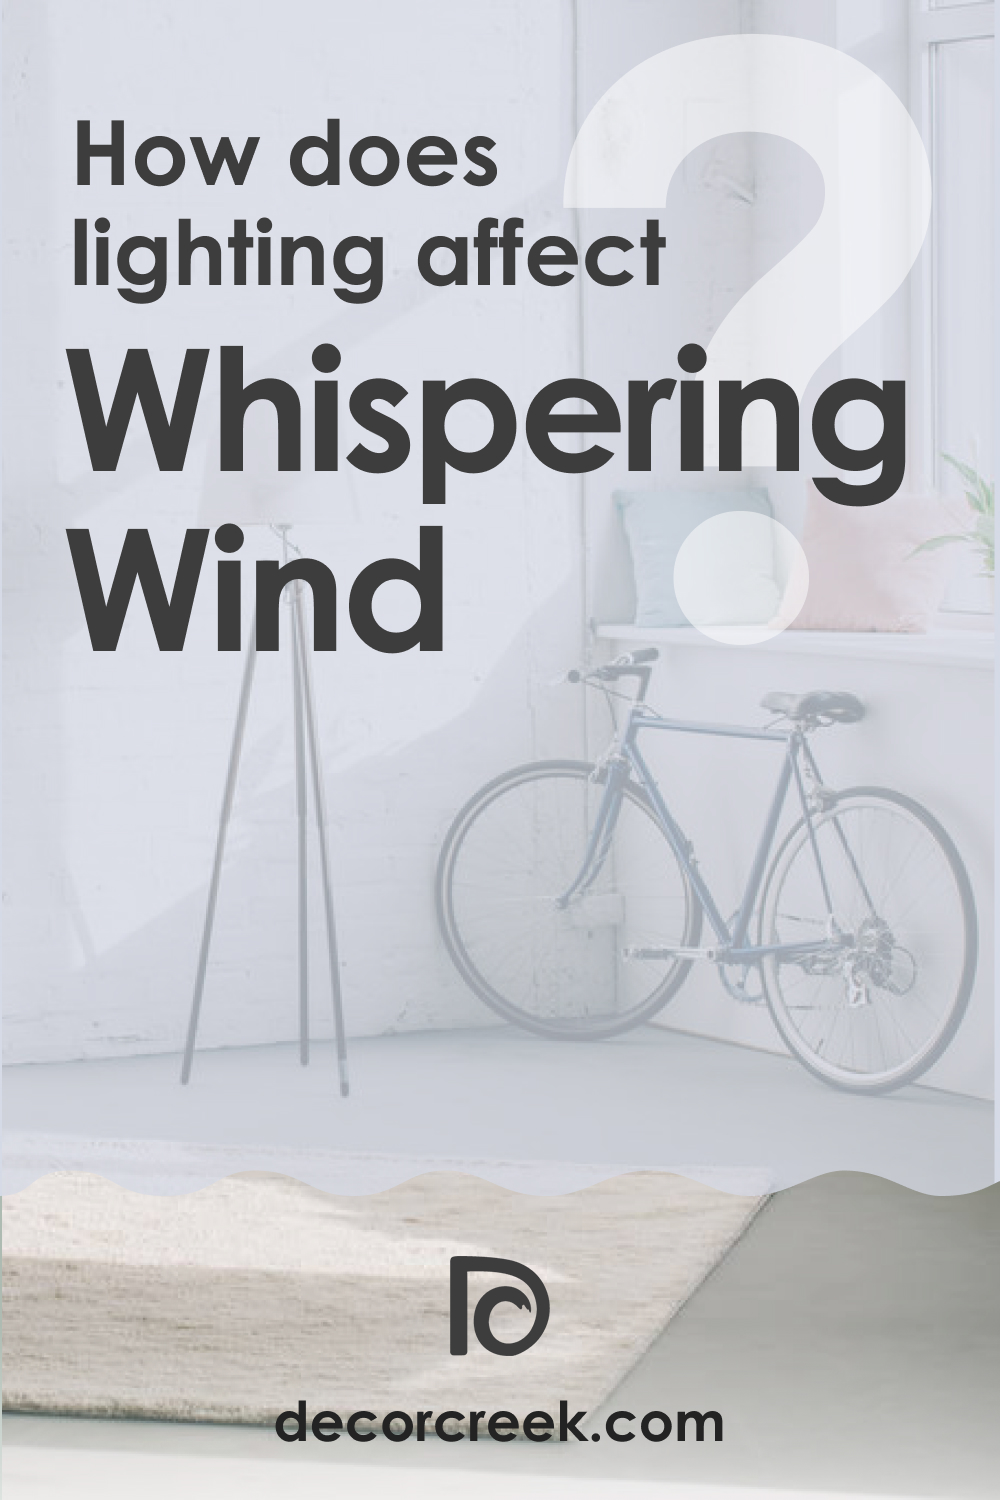 How Does Lighting Affect Whispering Wind 1416?